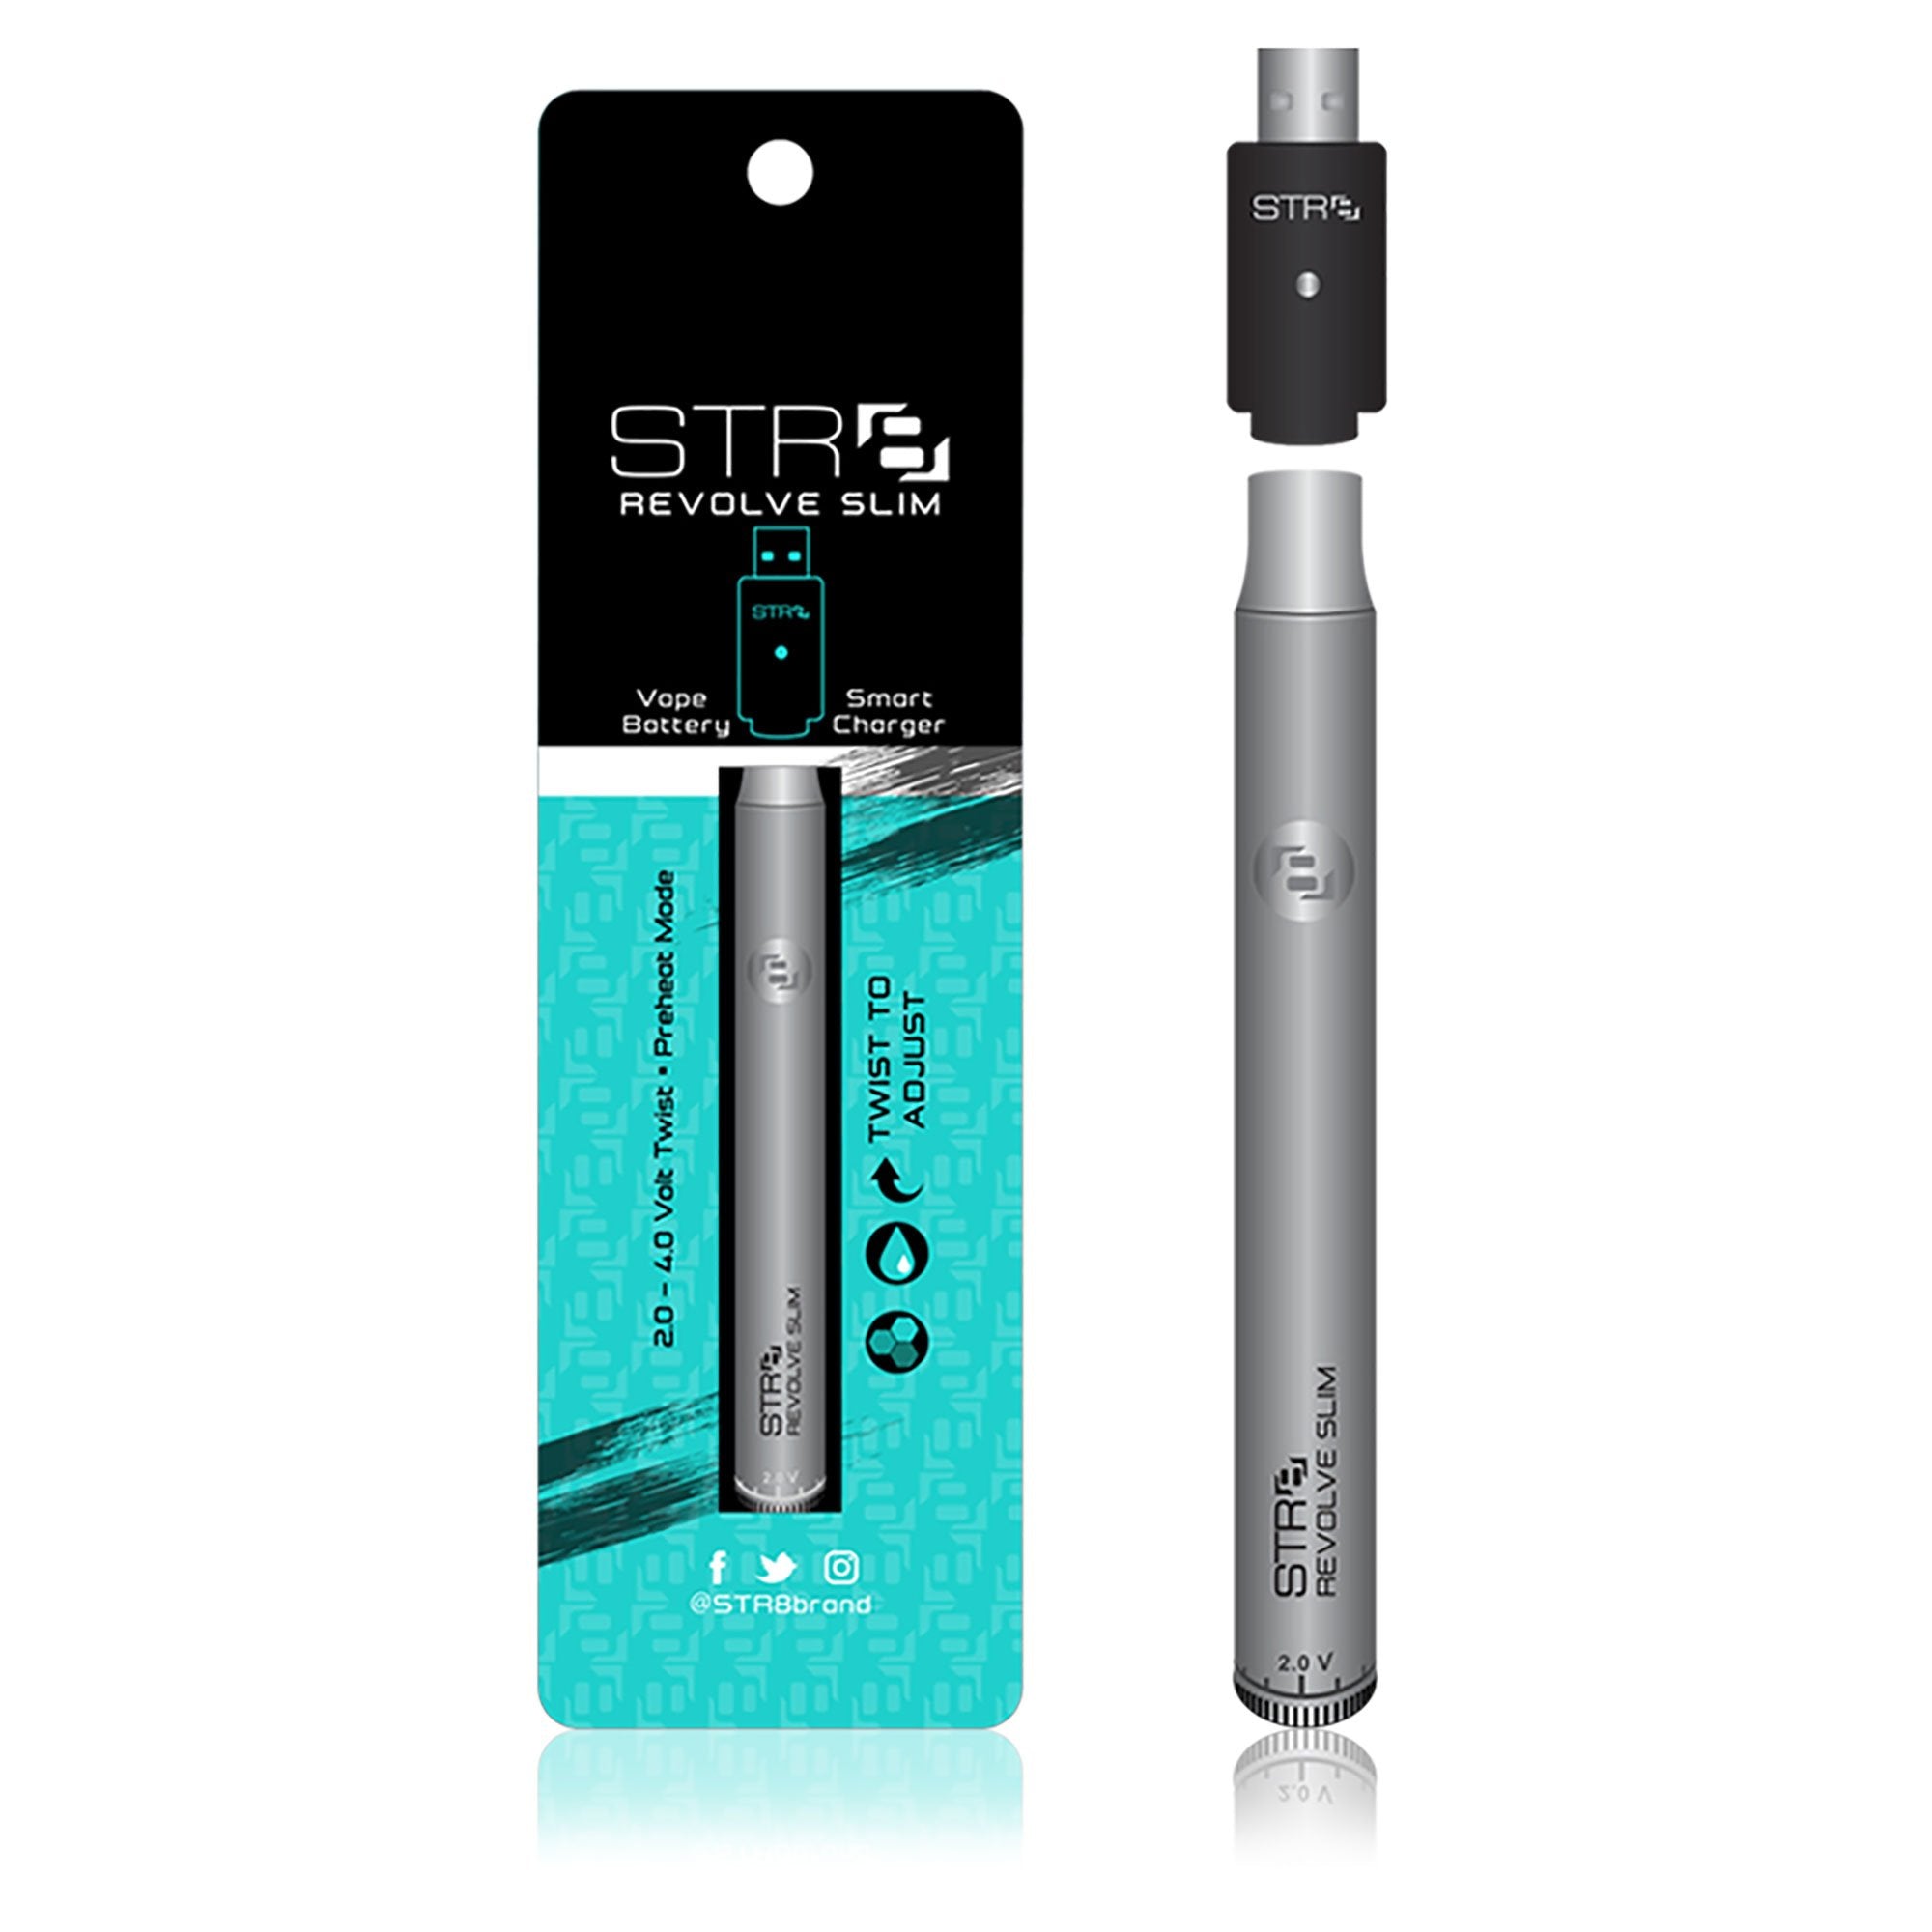 STR8 | Slim Revolve Battery w/ Charger | 320mAh - Silver - 5 Count - 1